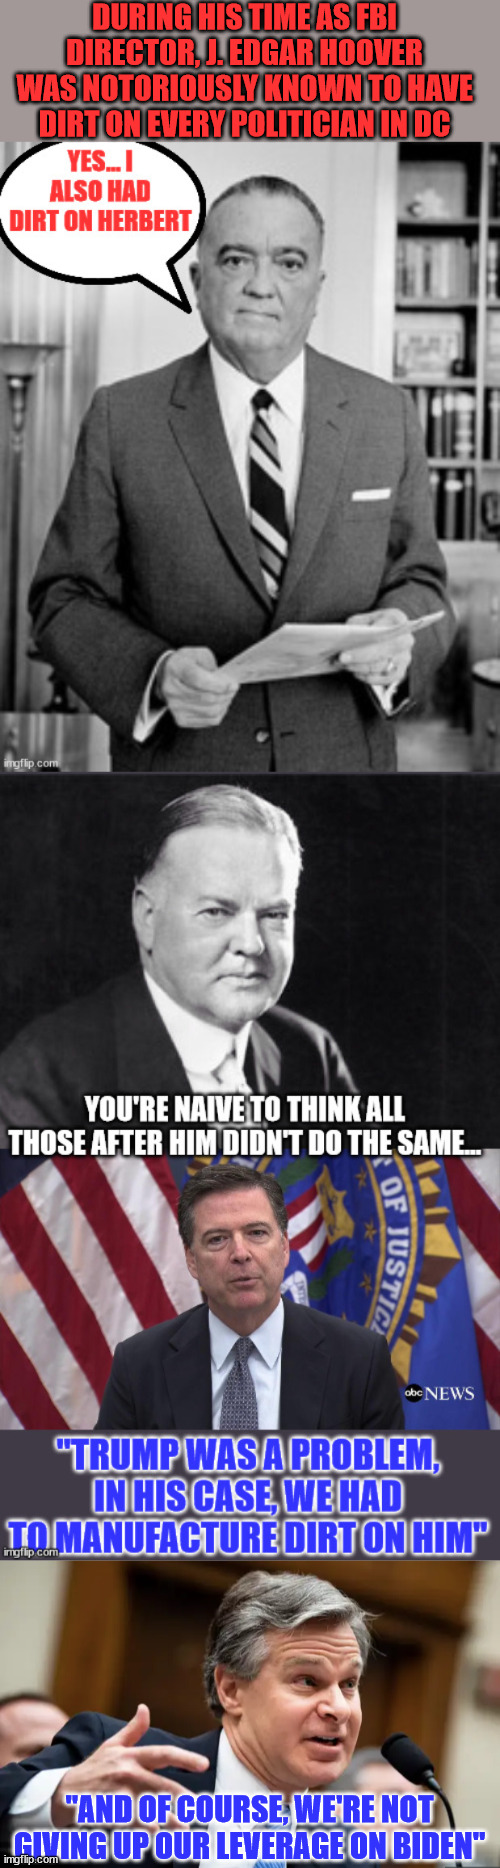 FBI directors...  Hoover tradition of dishonesty continues... | DURING HIS TIME AS FBI DIRECTOR, J. EDGAR HOOVER WAS NOTORIOUSLY KNOWN TO HAVE DIRT ON EVERY POLITICIAN IN DC; "AND OF COURSE, WE'RE NOT GIVING UP OUR LEVERAGE ON BIDEN" | image tagged in chris wray fbi,crooked,fbi,liars | made w/ Imgflip meme maker